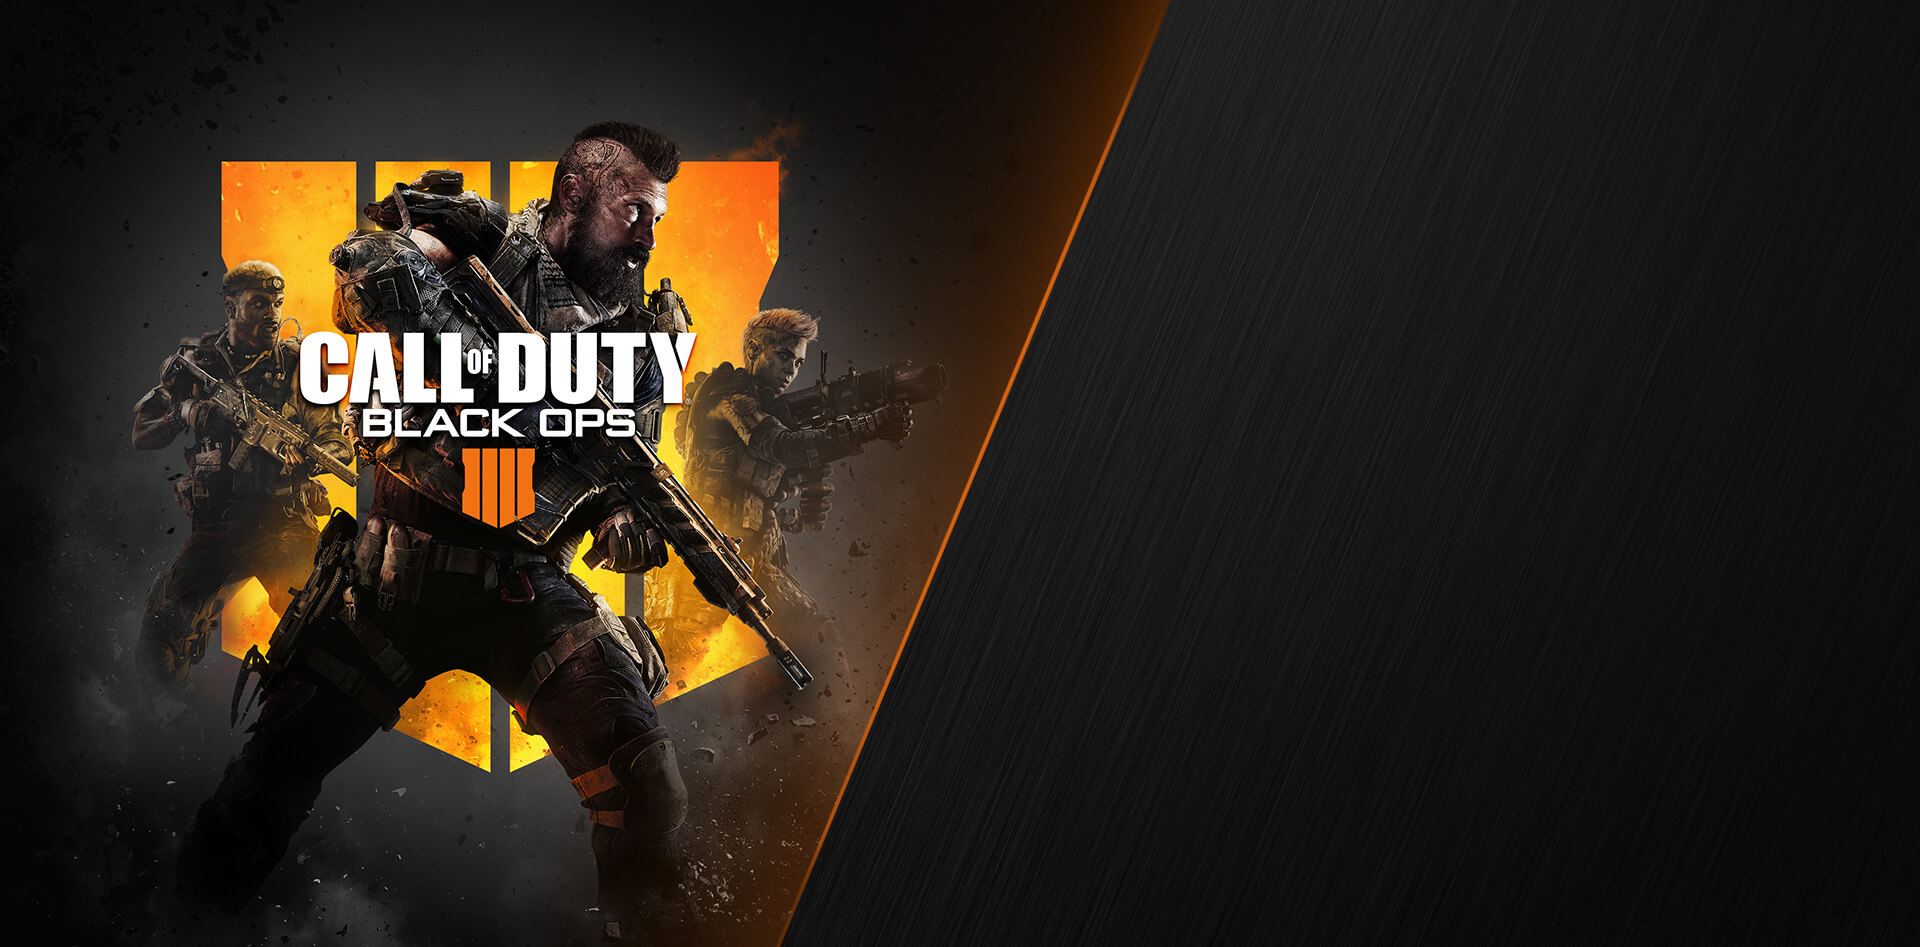 The main game visual of Call of duty black ops, there are three game characters in front of the yellow logo.